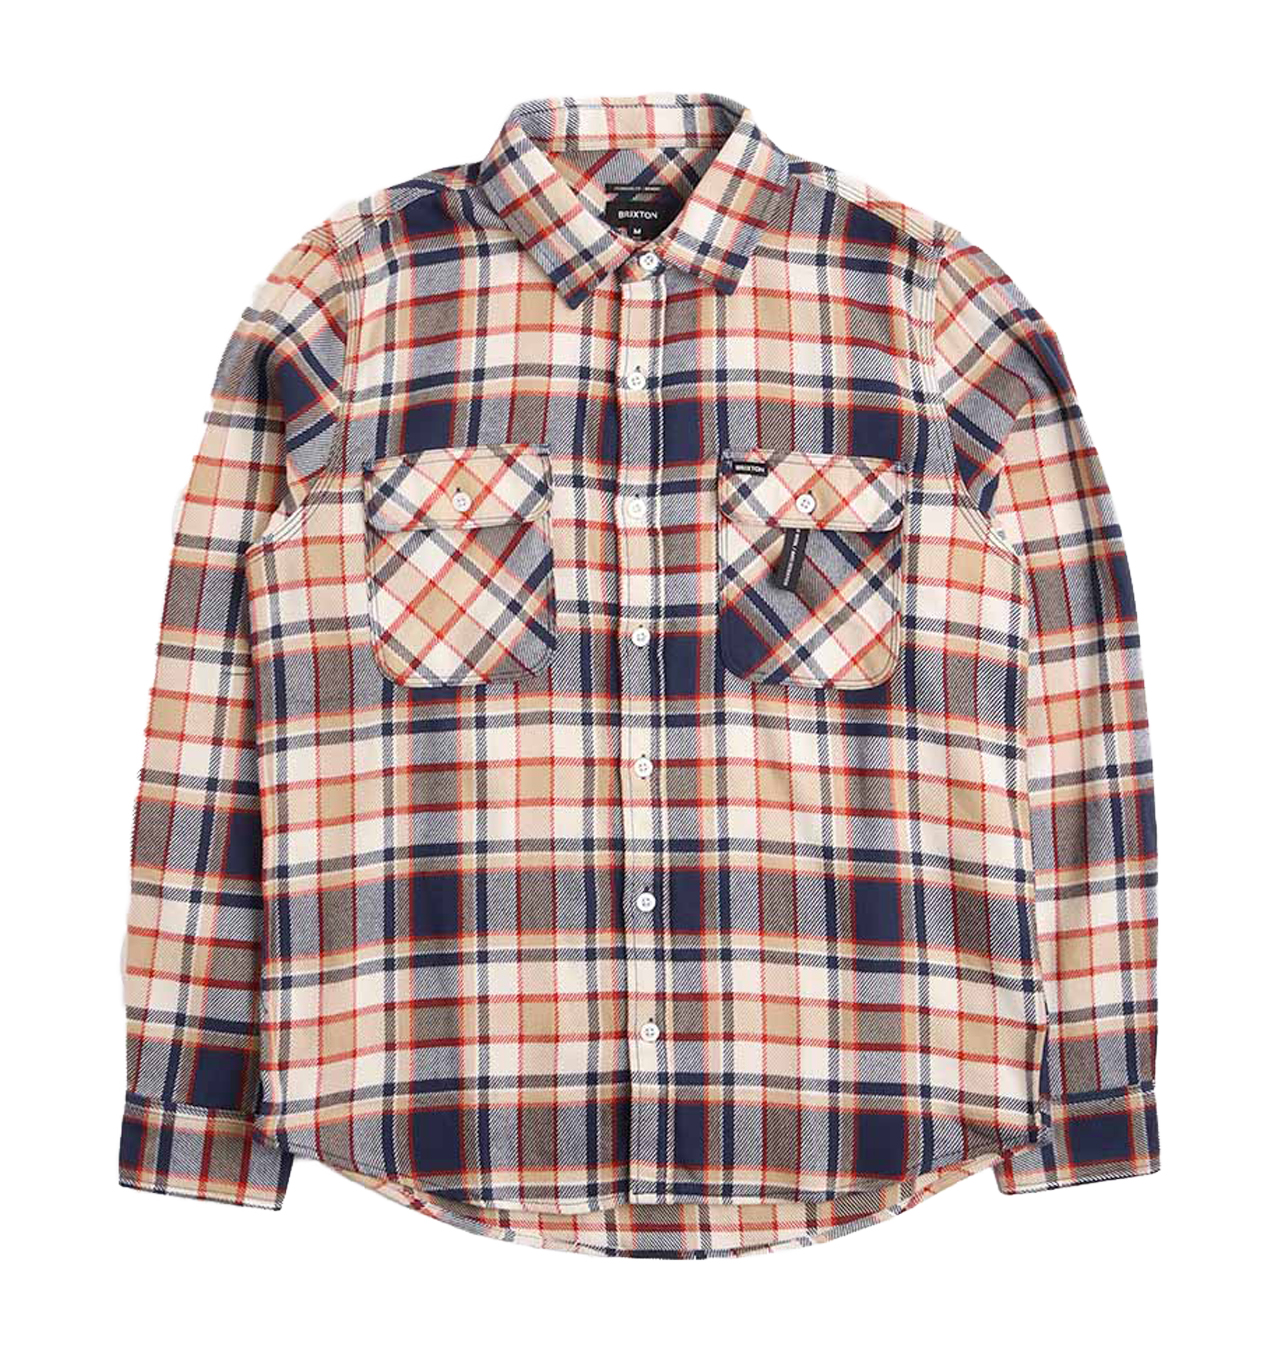 Brixton---Bowery-Flannel-Shirt---Washed-Navy-Barn-Red-Off-White